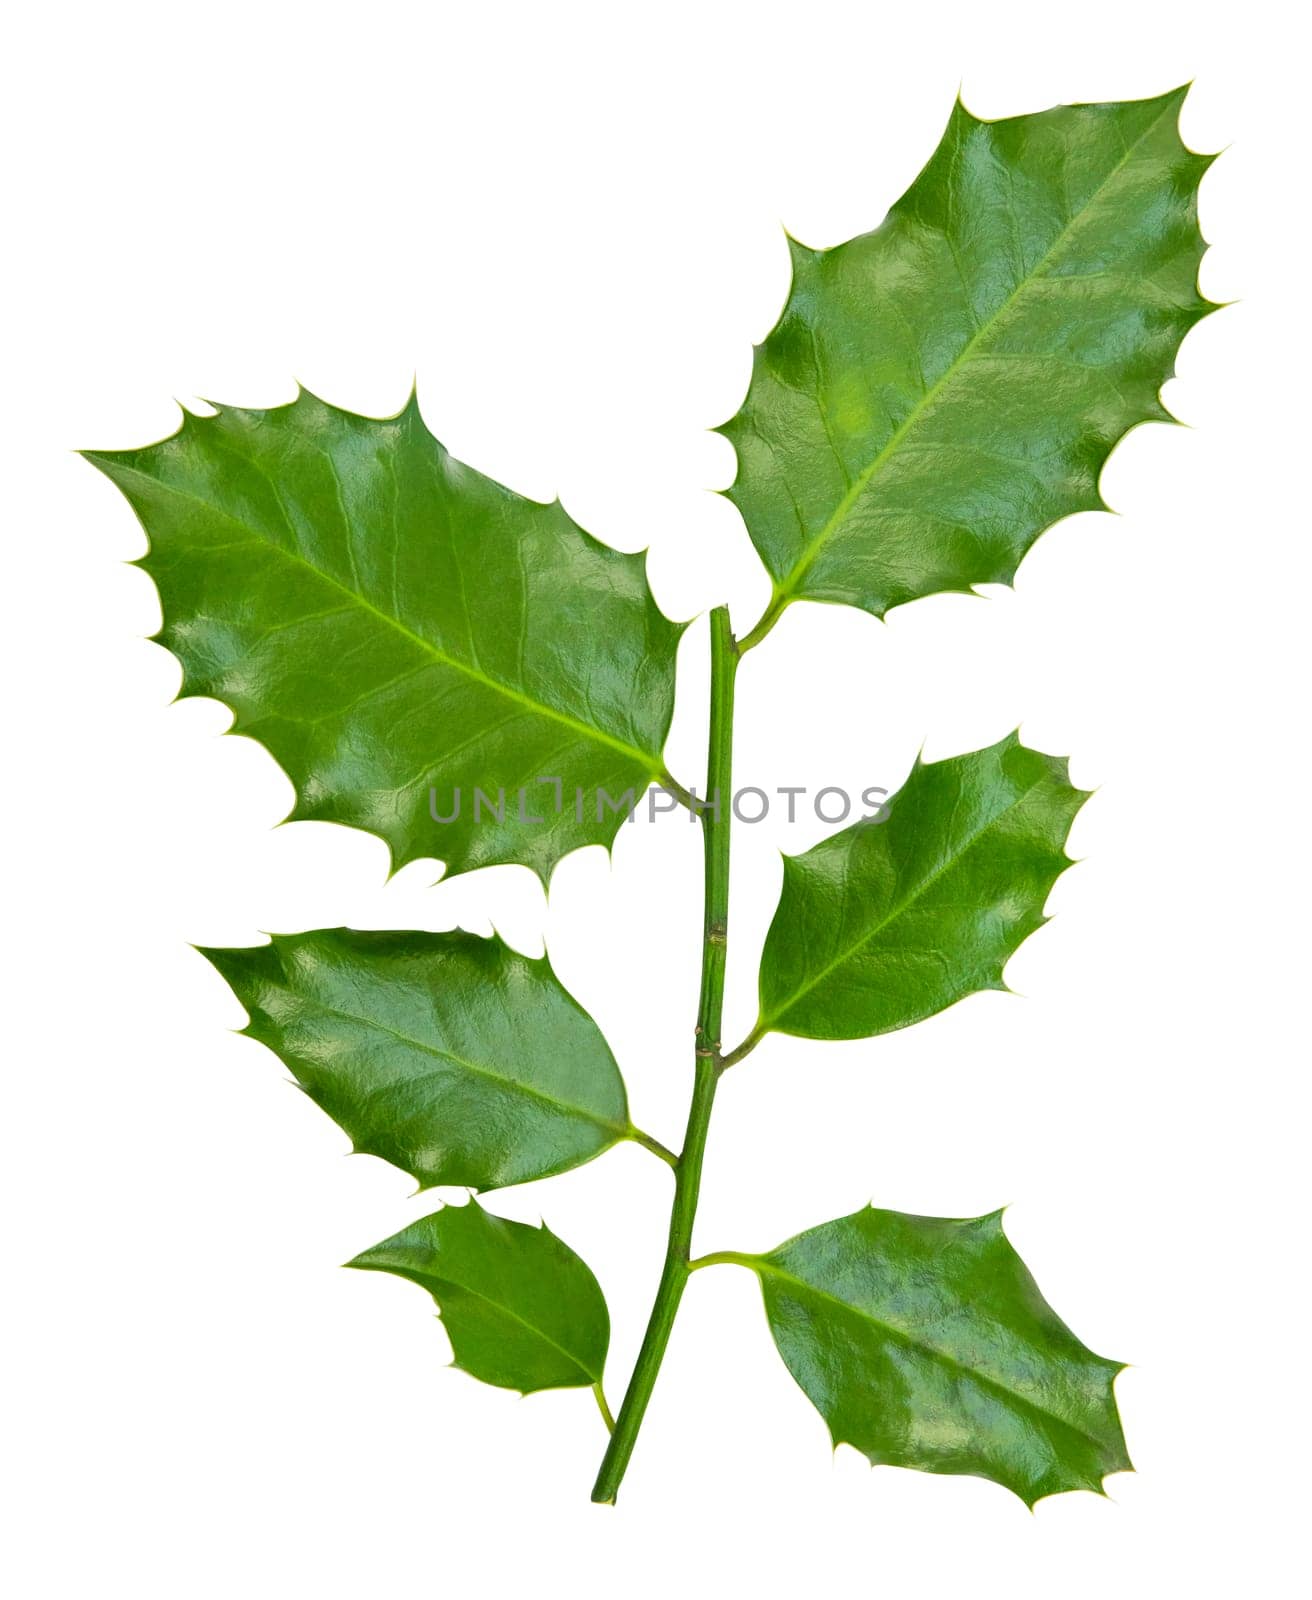 A Branch Of Holly Leaves For Christmas Isolated against a White Background.